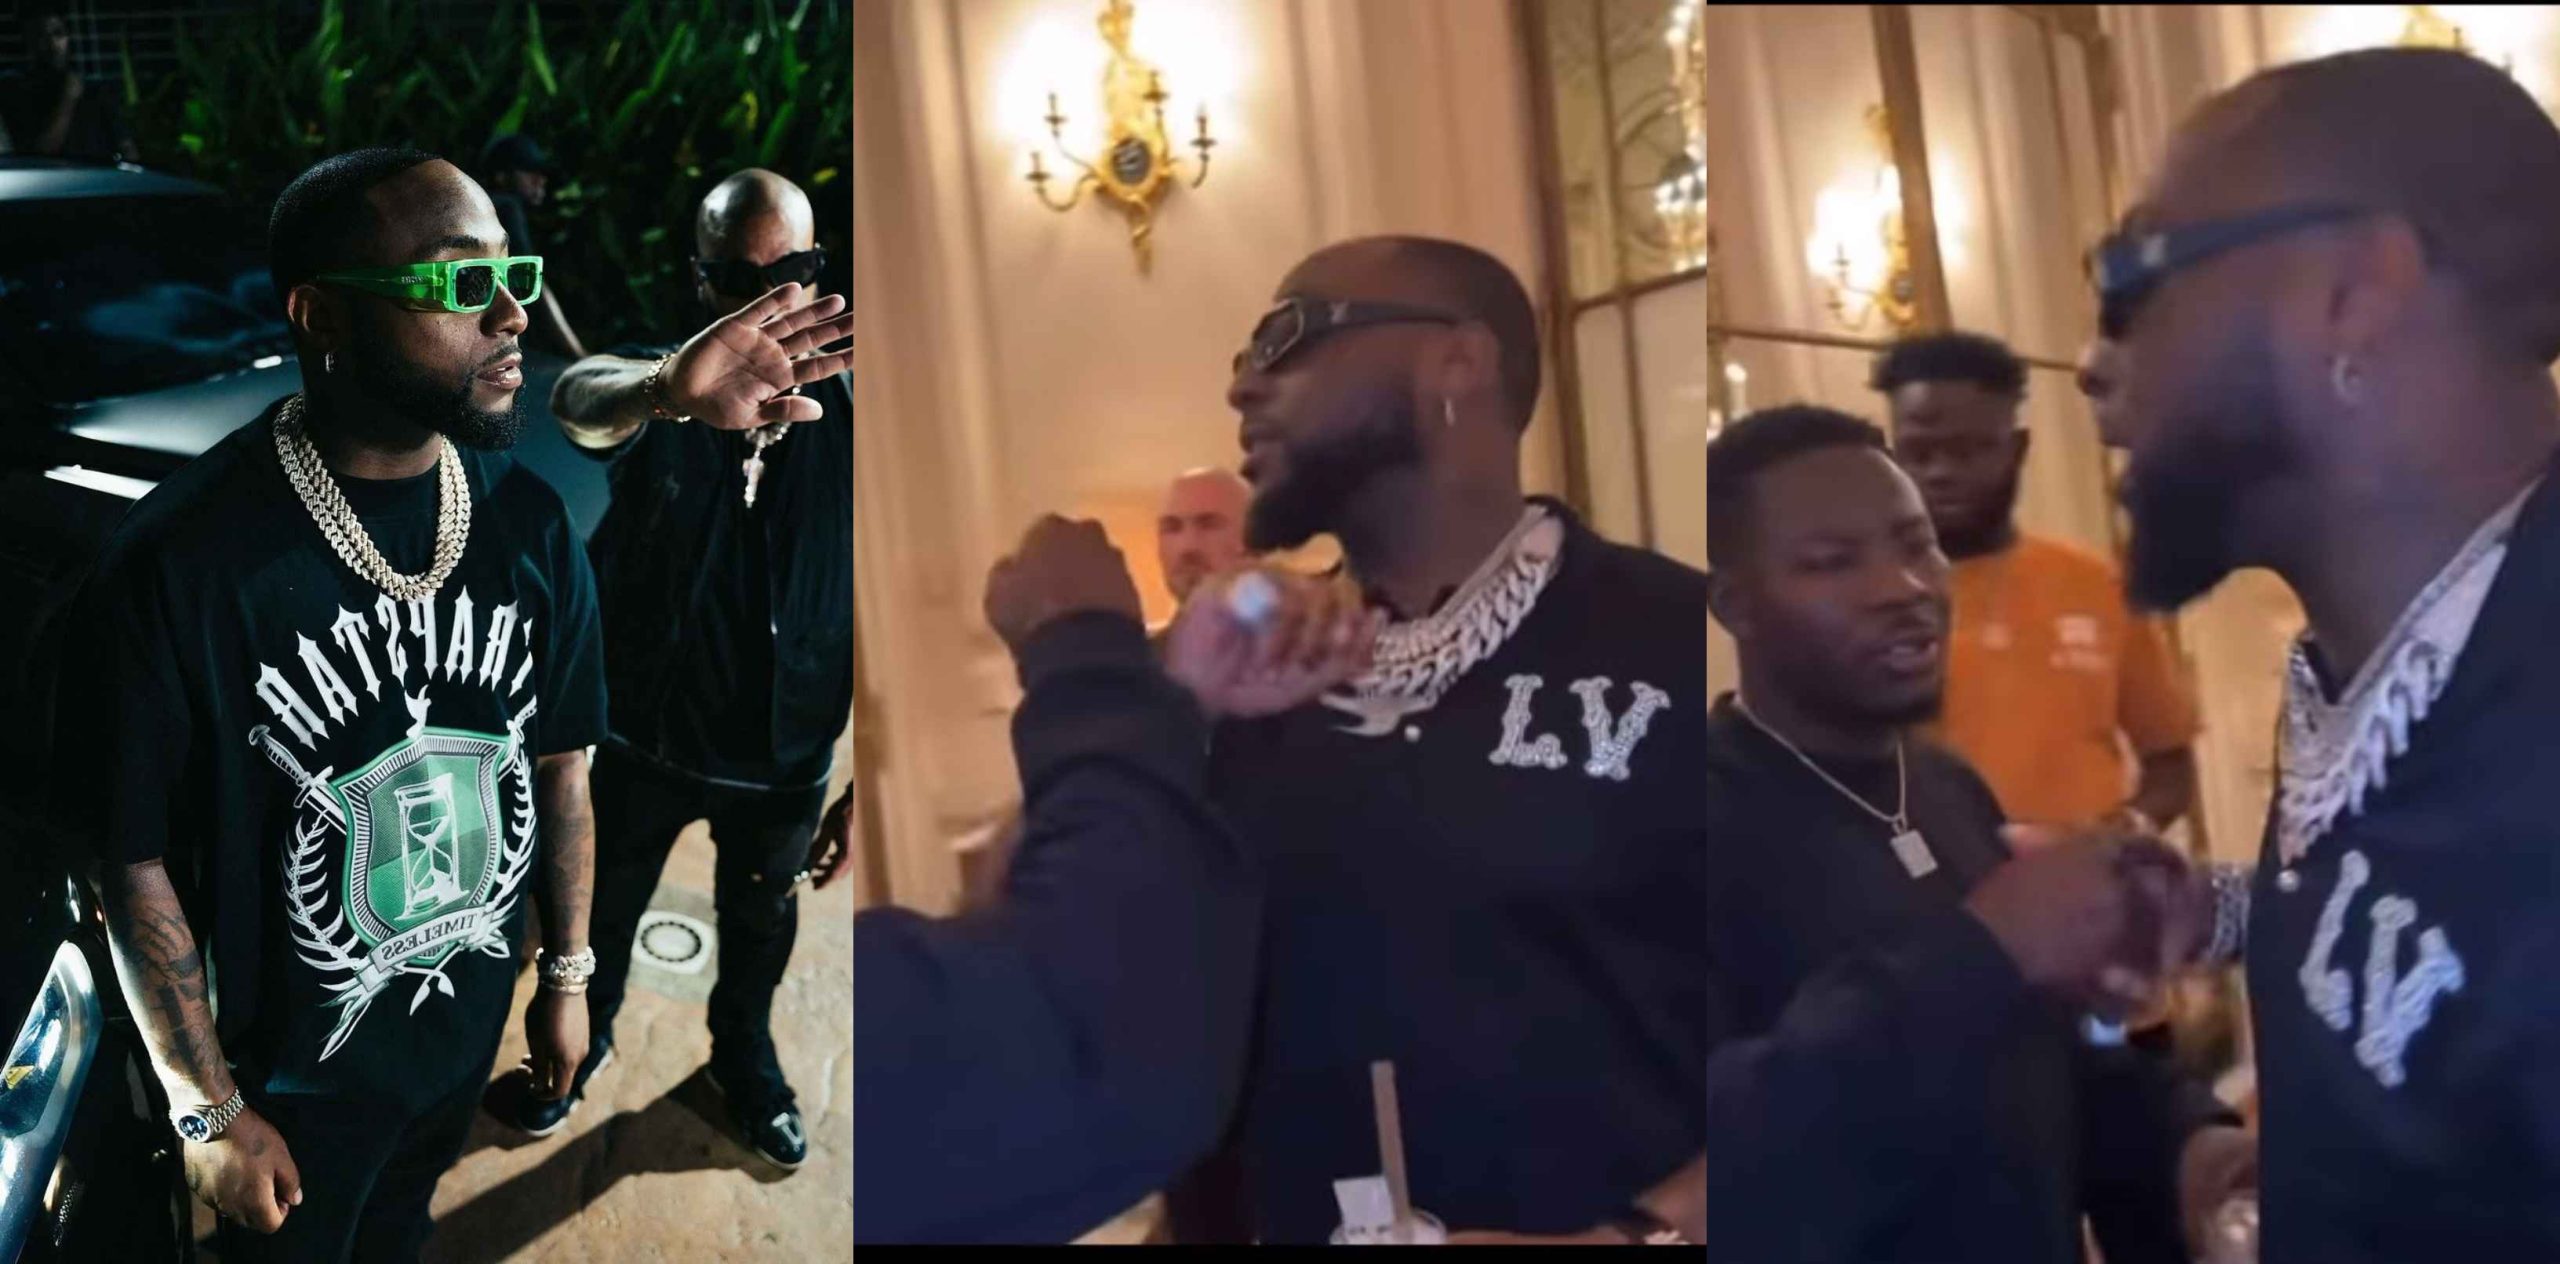 Mixed reactions as video of Davido shaking hands with man in black surface online 